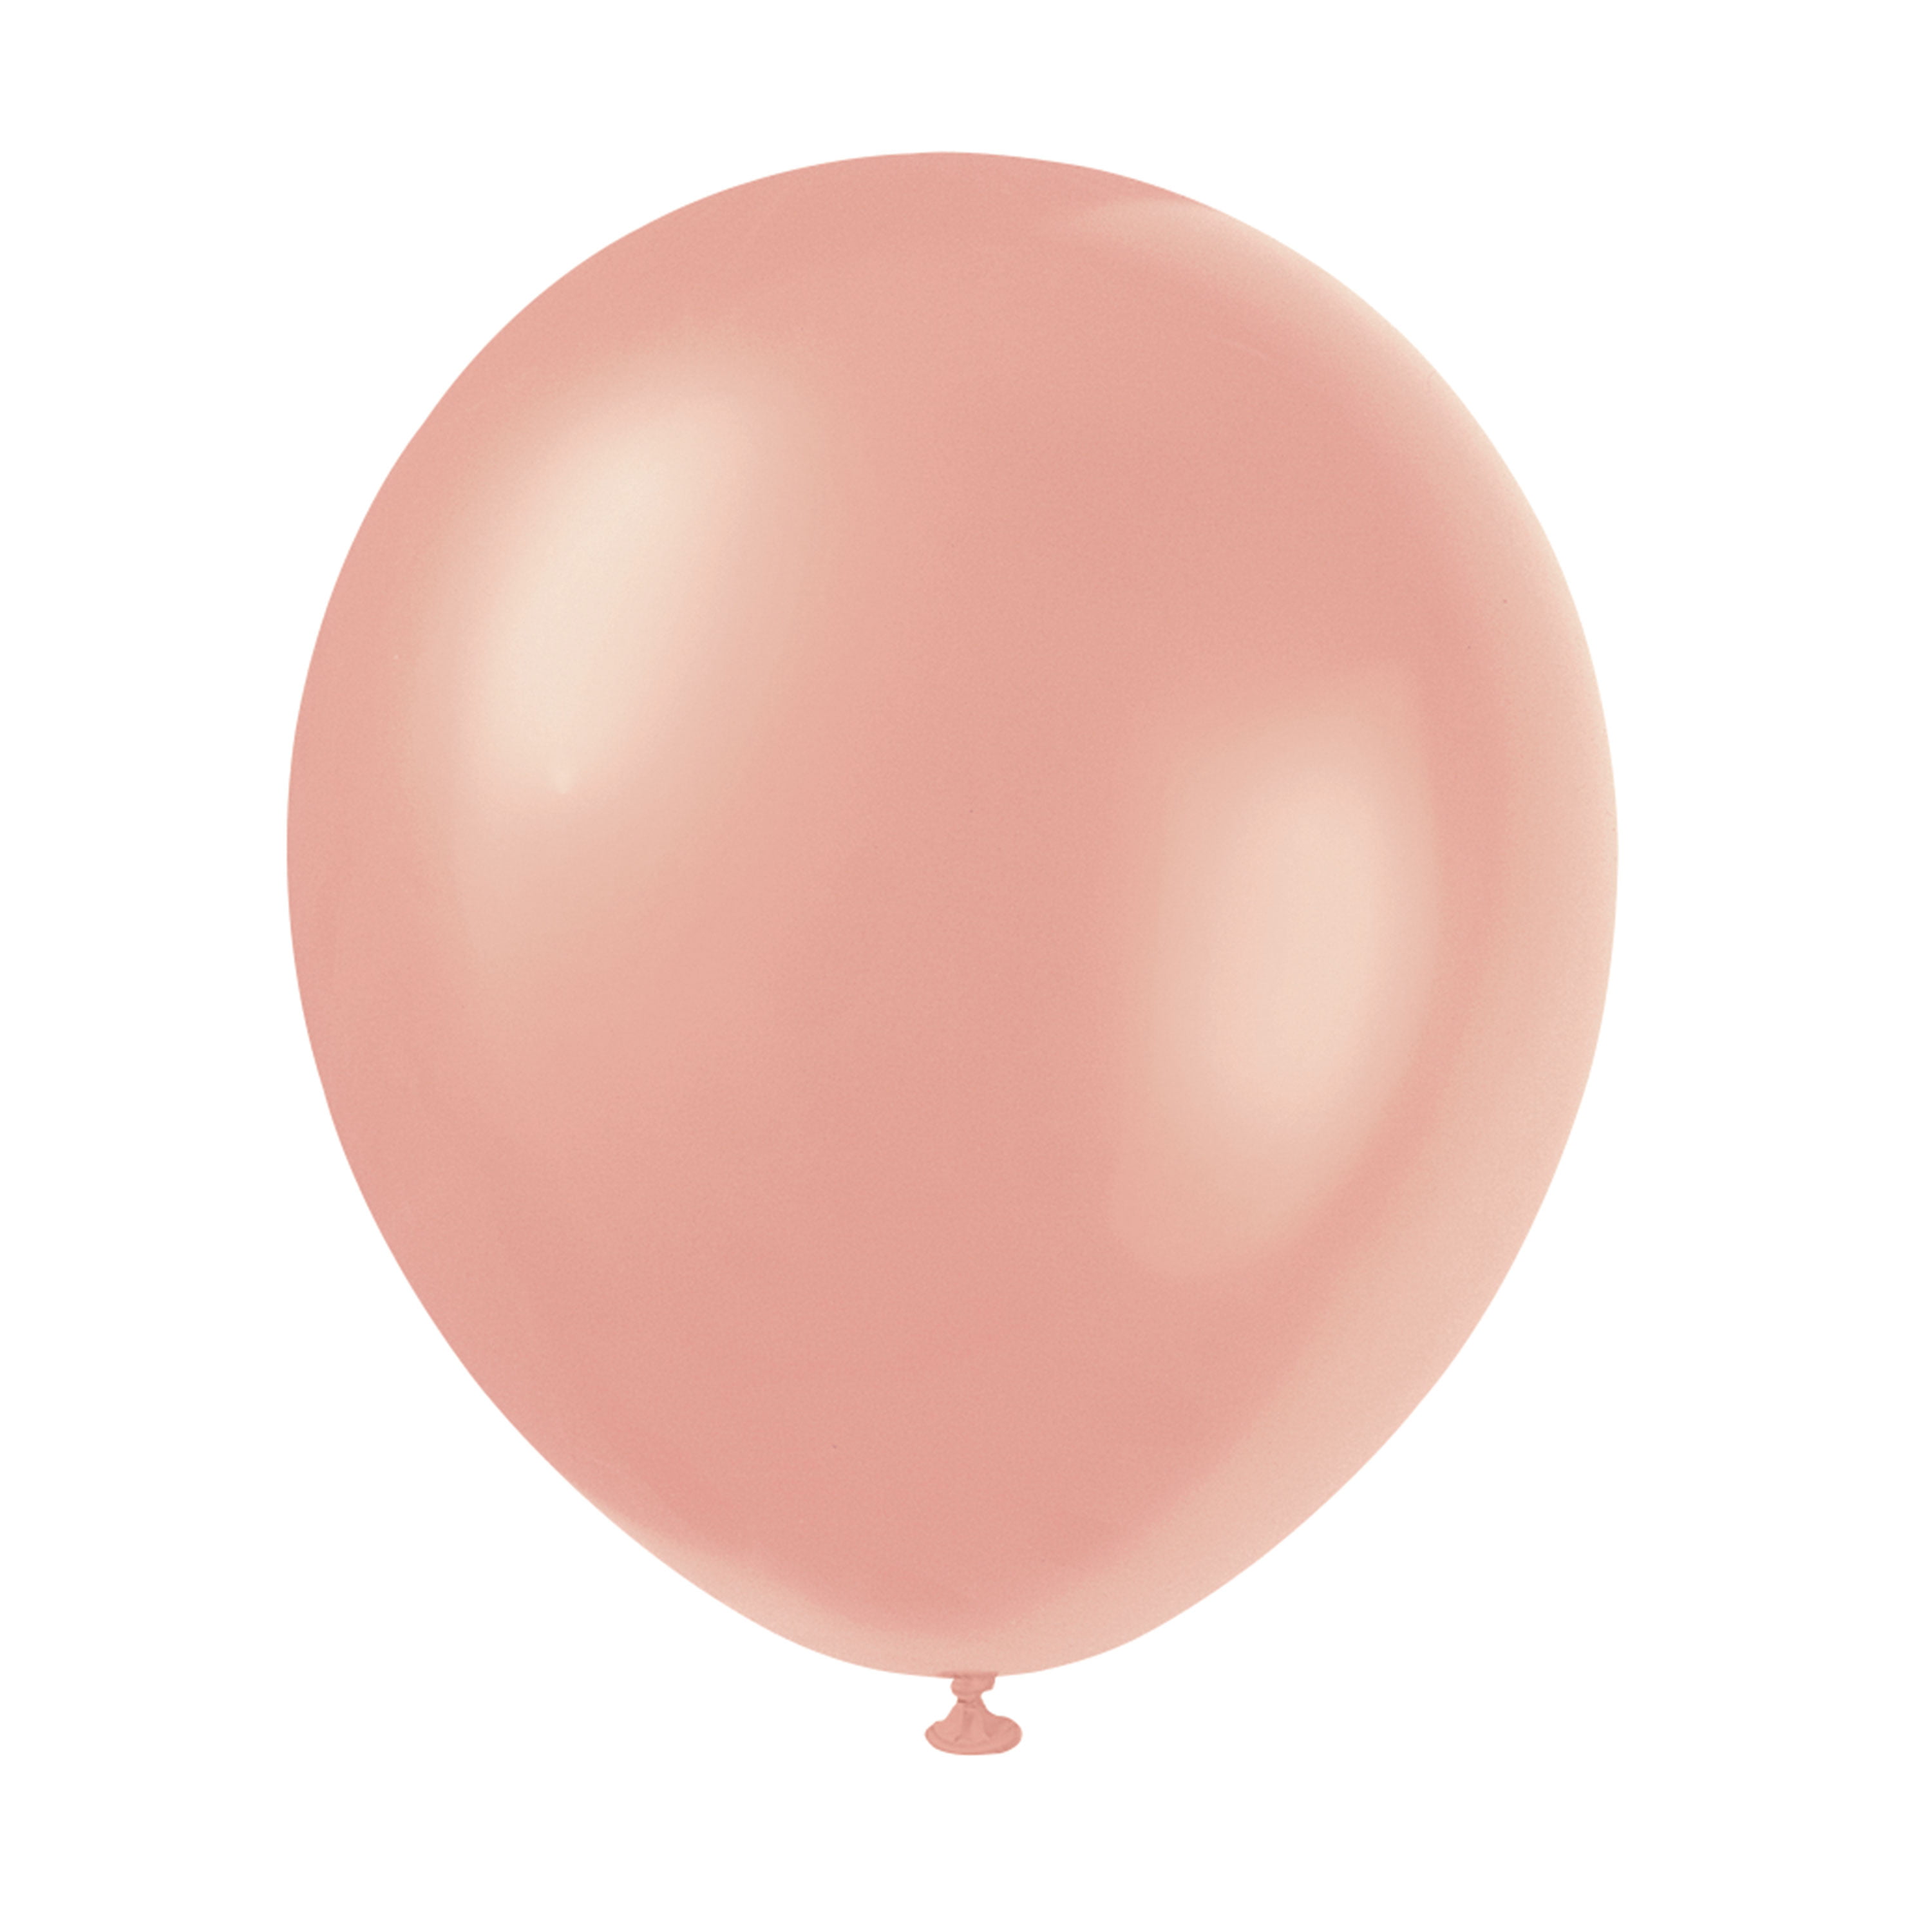 12 3.2 Helium Quality Pearl Latex Balloons Sweet Sixteen & Bridal Shower and More -100 Count. Light Pink and Rose Gold Baby Shower &1st Birthday Perfect for Birthday Parties Pearl White 